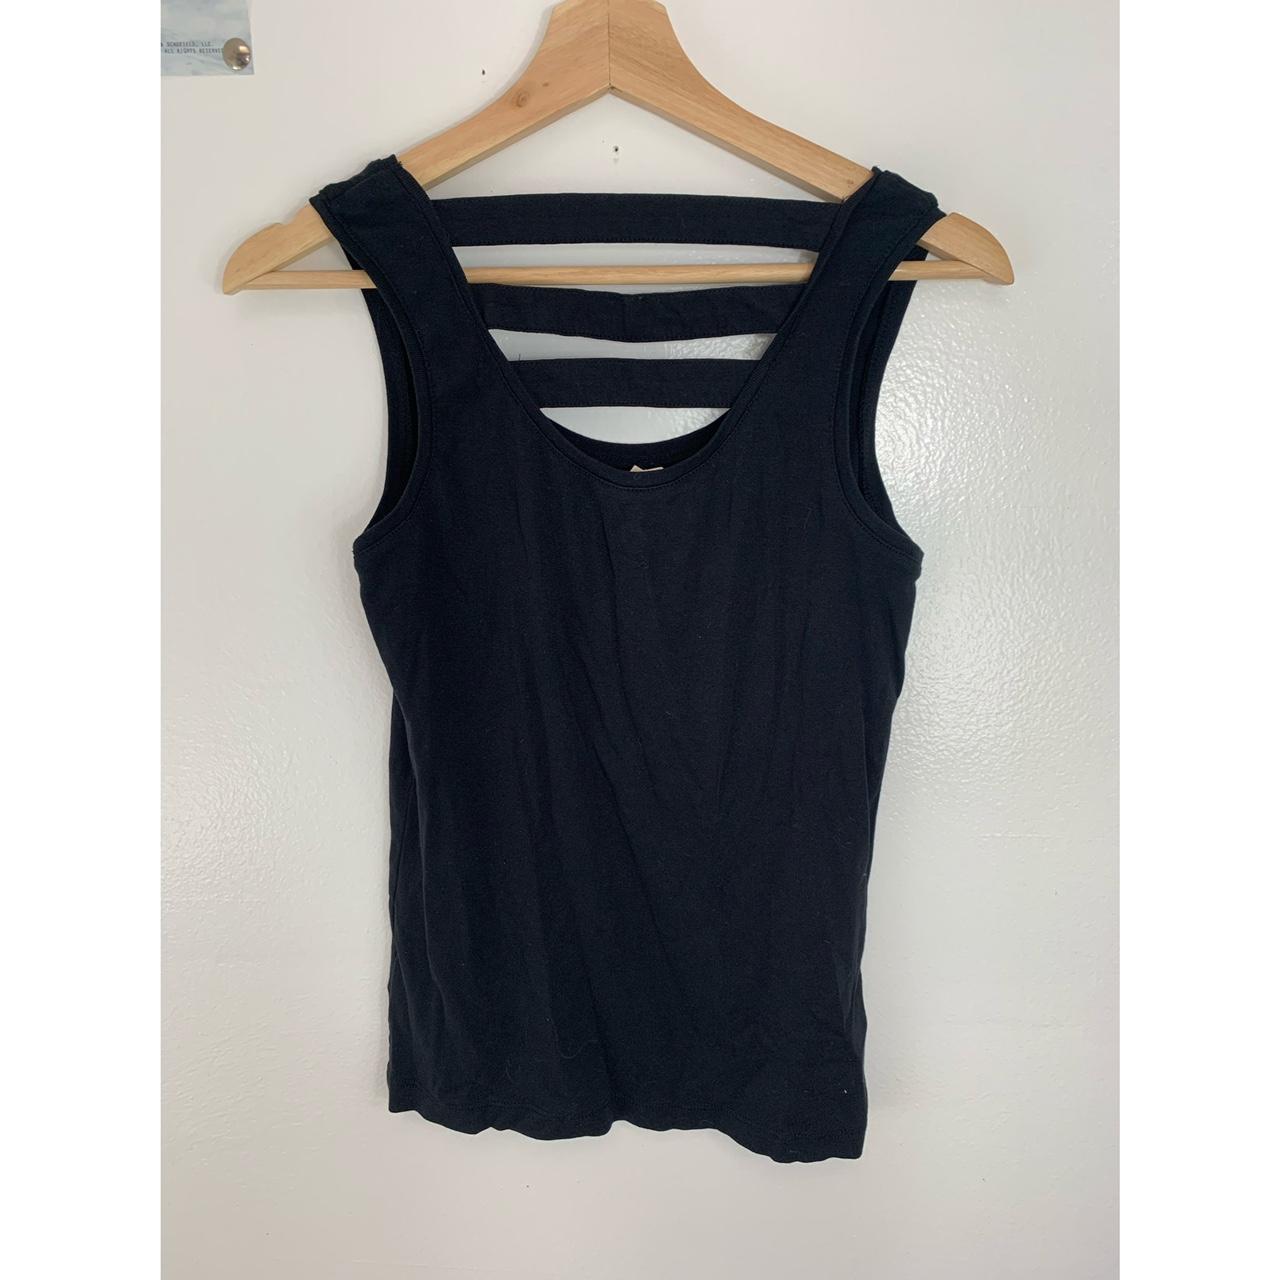 Product Image 2 - Black tank with striped open